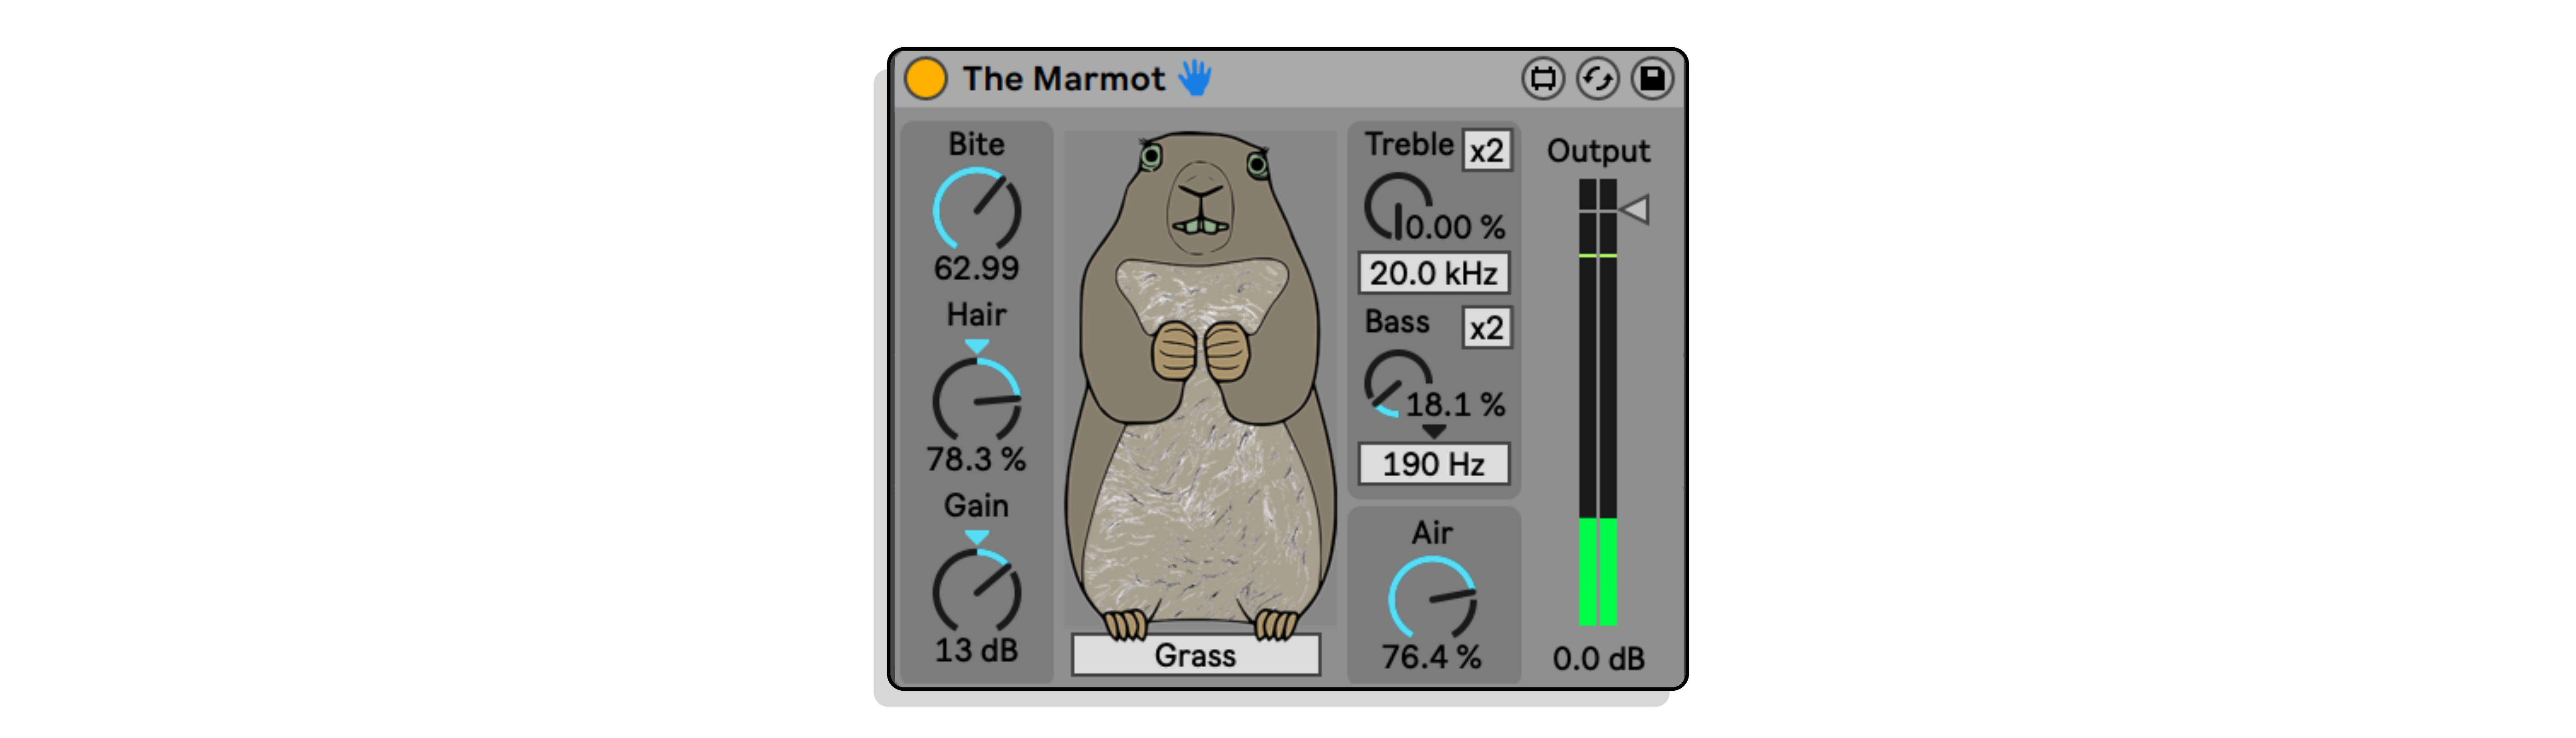 The Marmot MaxforLive Device for Ableton Live by White Horse